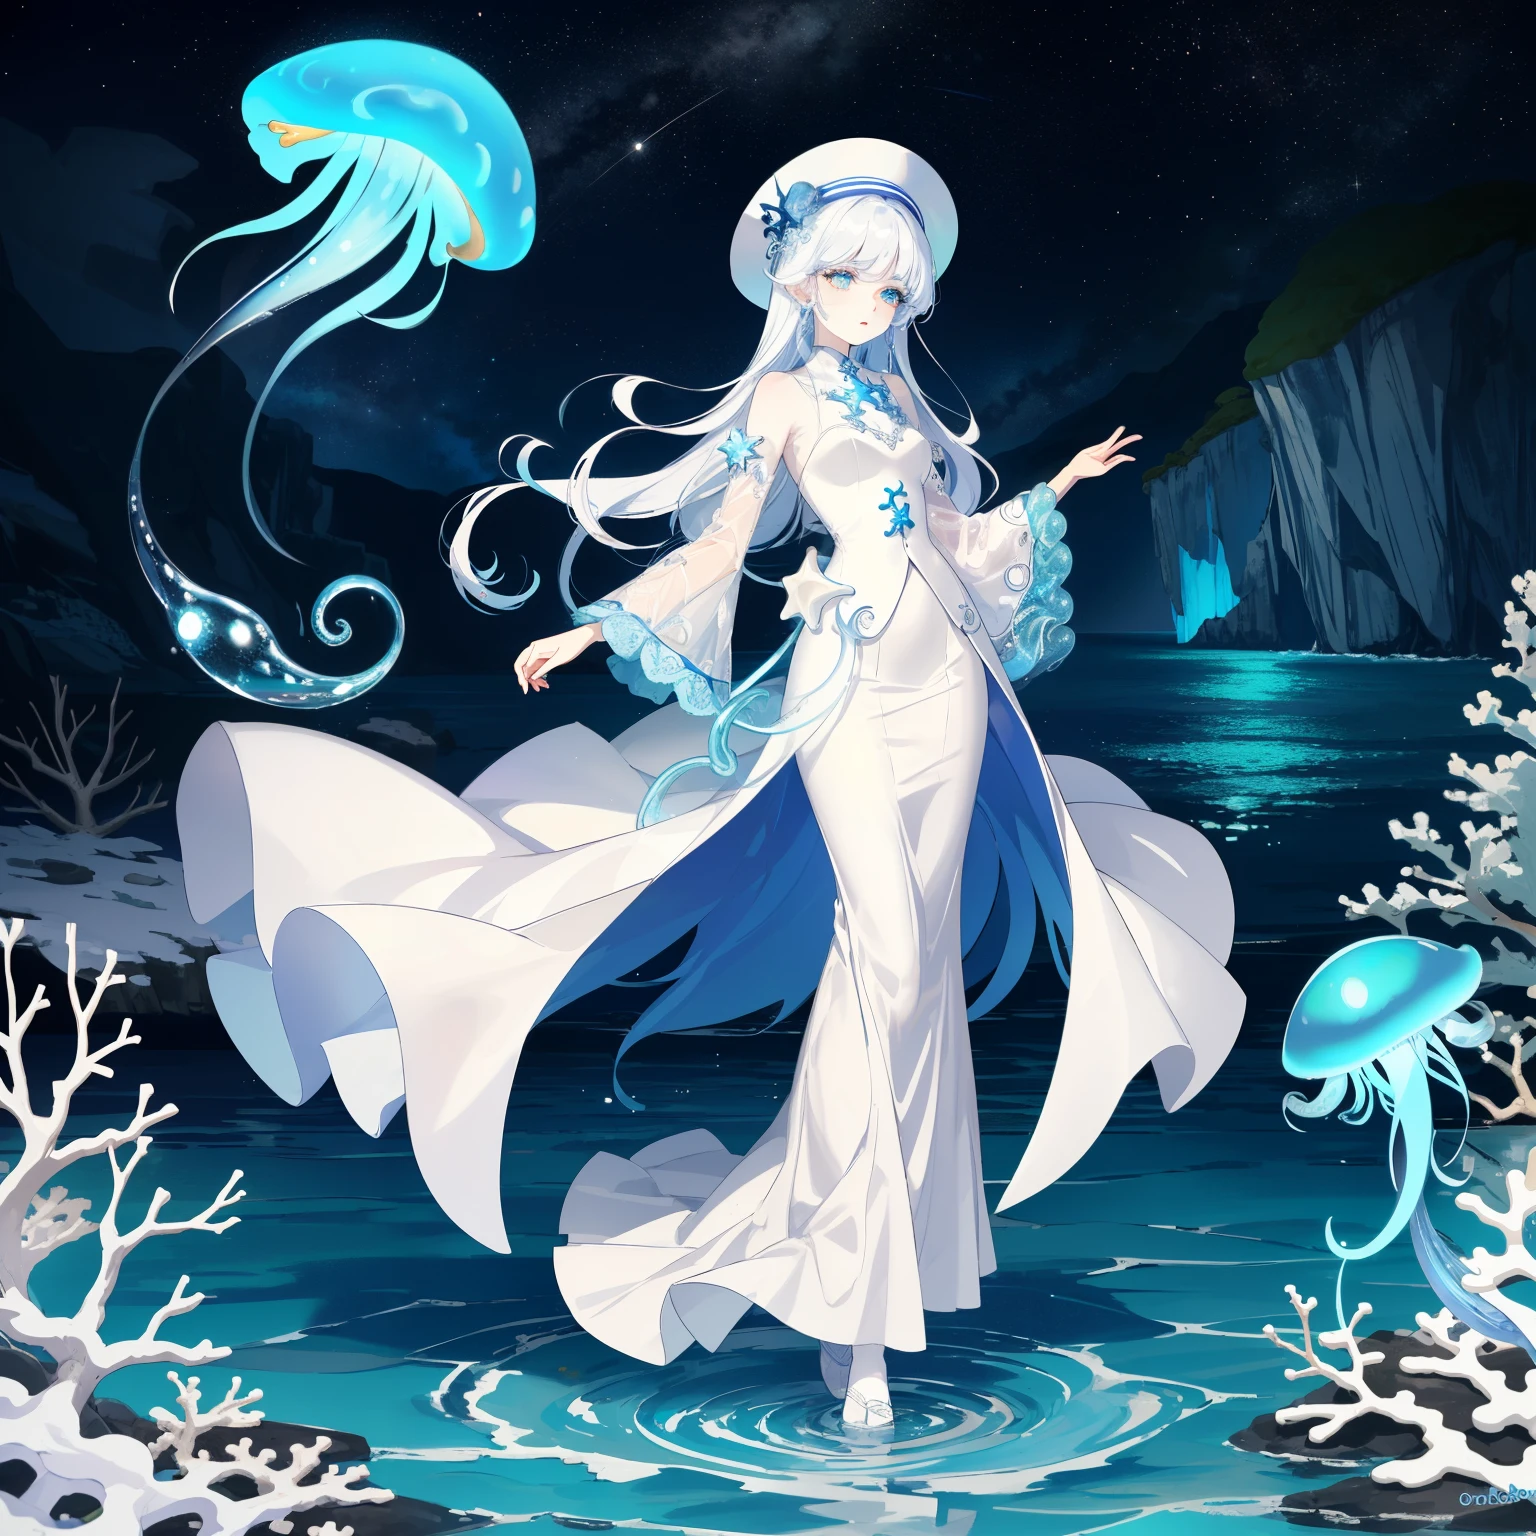 ((best quality)), ((masterpiece)), (detailed), ocean, night, (starry sky), Cool colors, 1girl, standing, full_body, (front_view), White fishtail skirt, long skirt, white wide brimmed hat, (blue tentacle hair), ((Pale skin)), The most beautiful face, Close eyes, ((long eyelashes)), expressionless, ((White coral)), (Transparent little jellyfish)